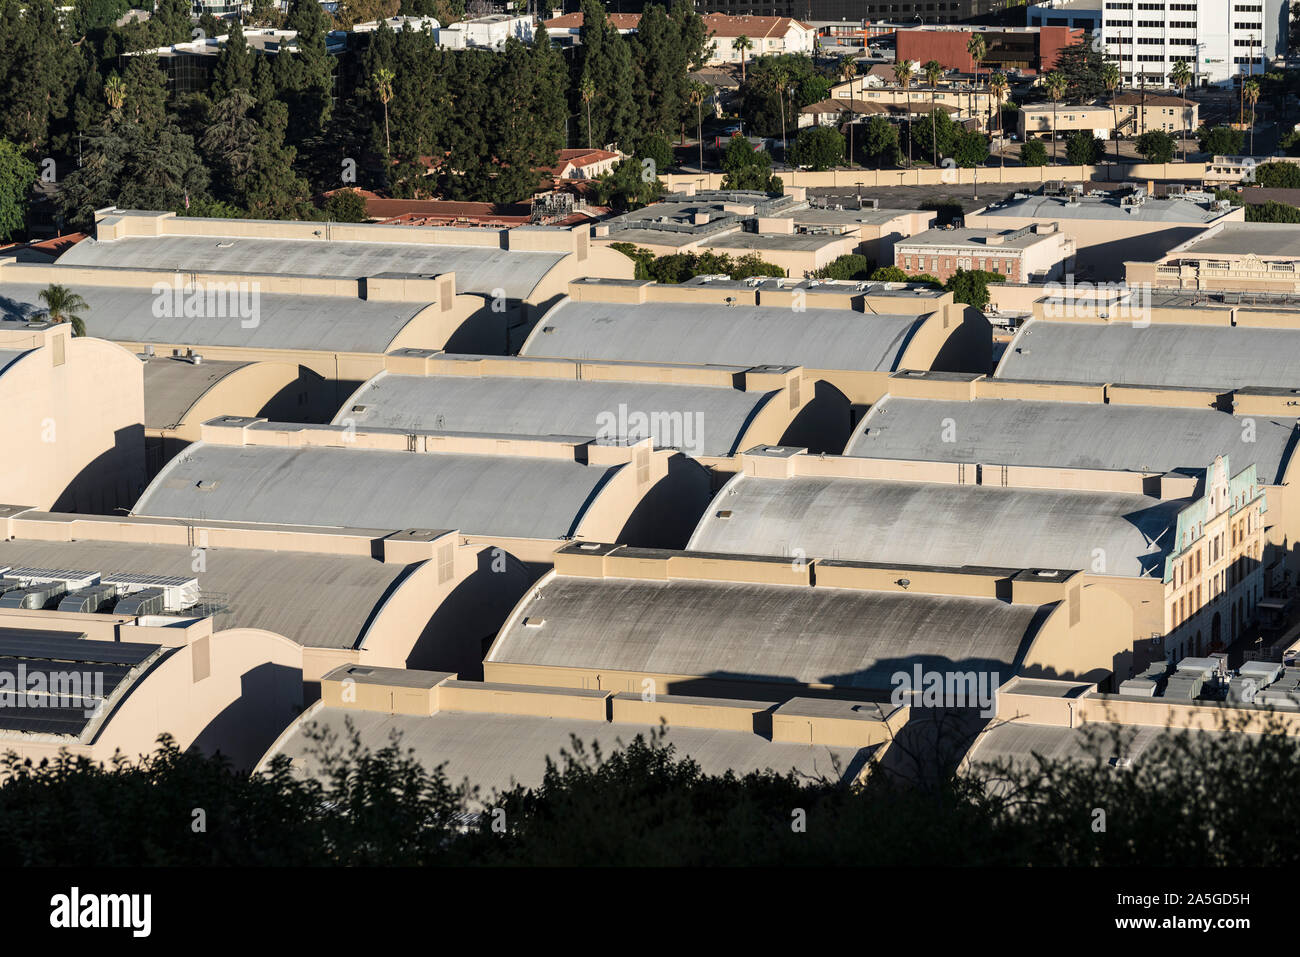 Burbank, California, USA - October 20, 2019:  Morning view of historic sound stages with curved rooftops at the Warner Bros studio lot near Los Angele Stock Photo